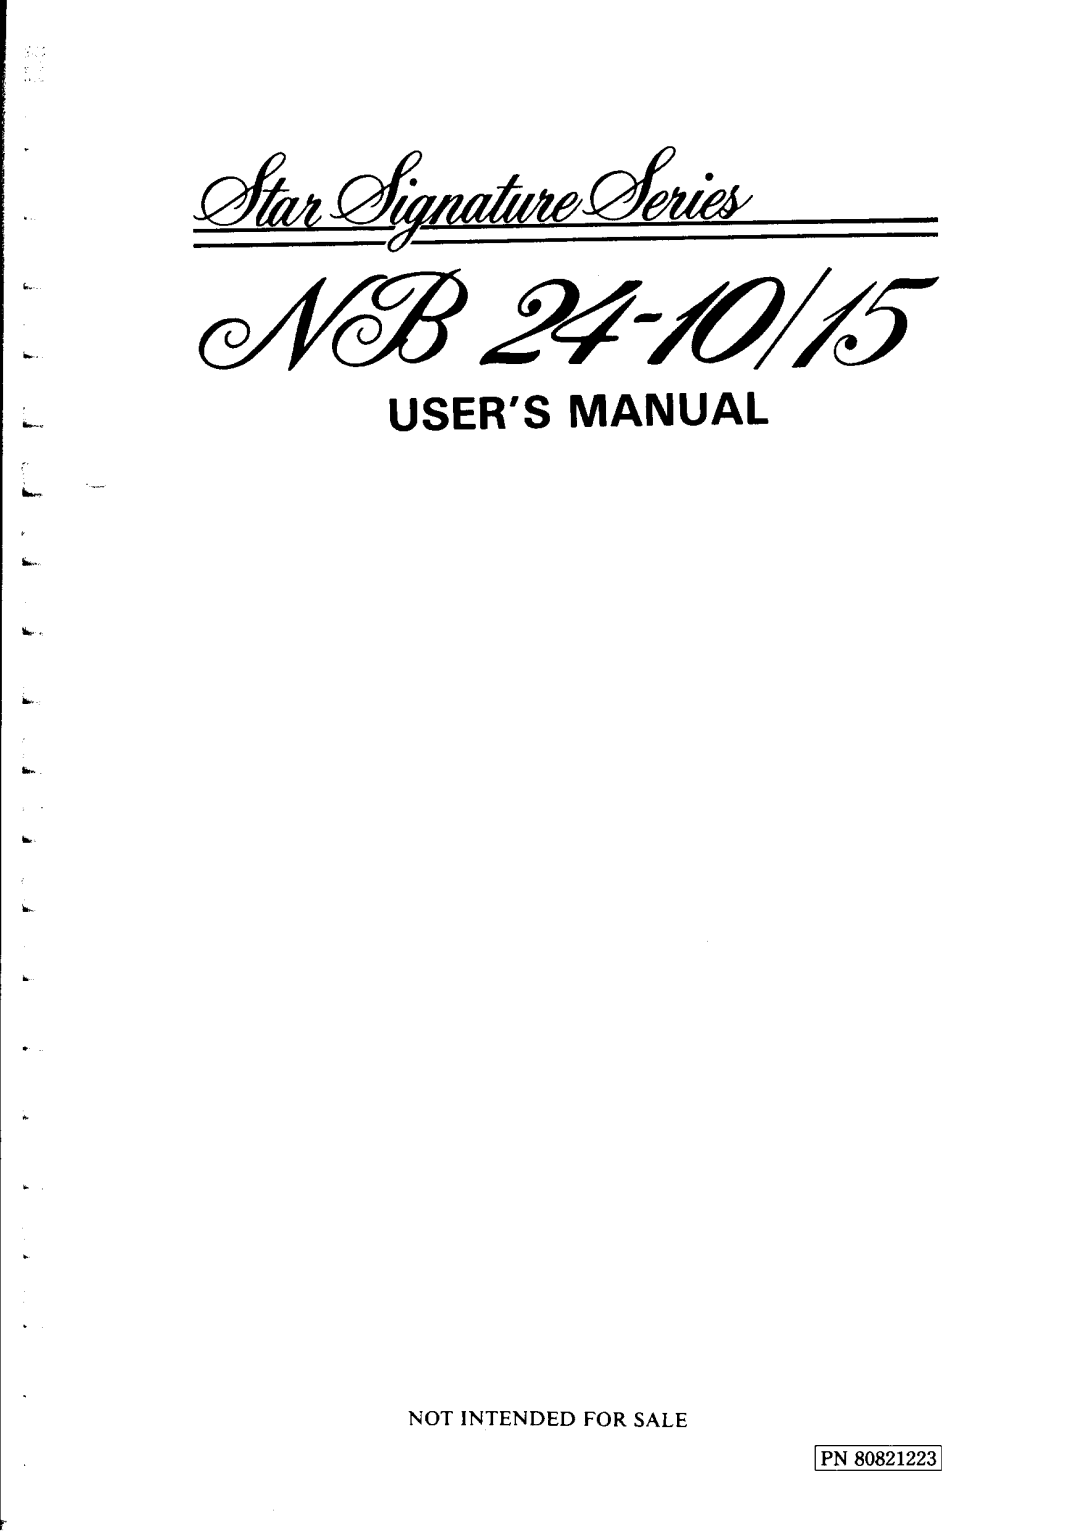 Star Micronics NB24-10/15 user manual User’S Manual, NOT INTENDED FOR SALE 1PN 80821223 